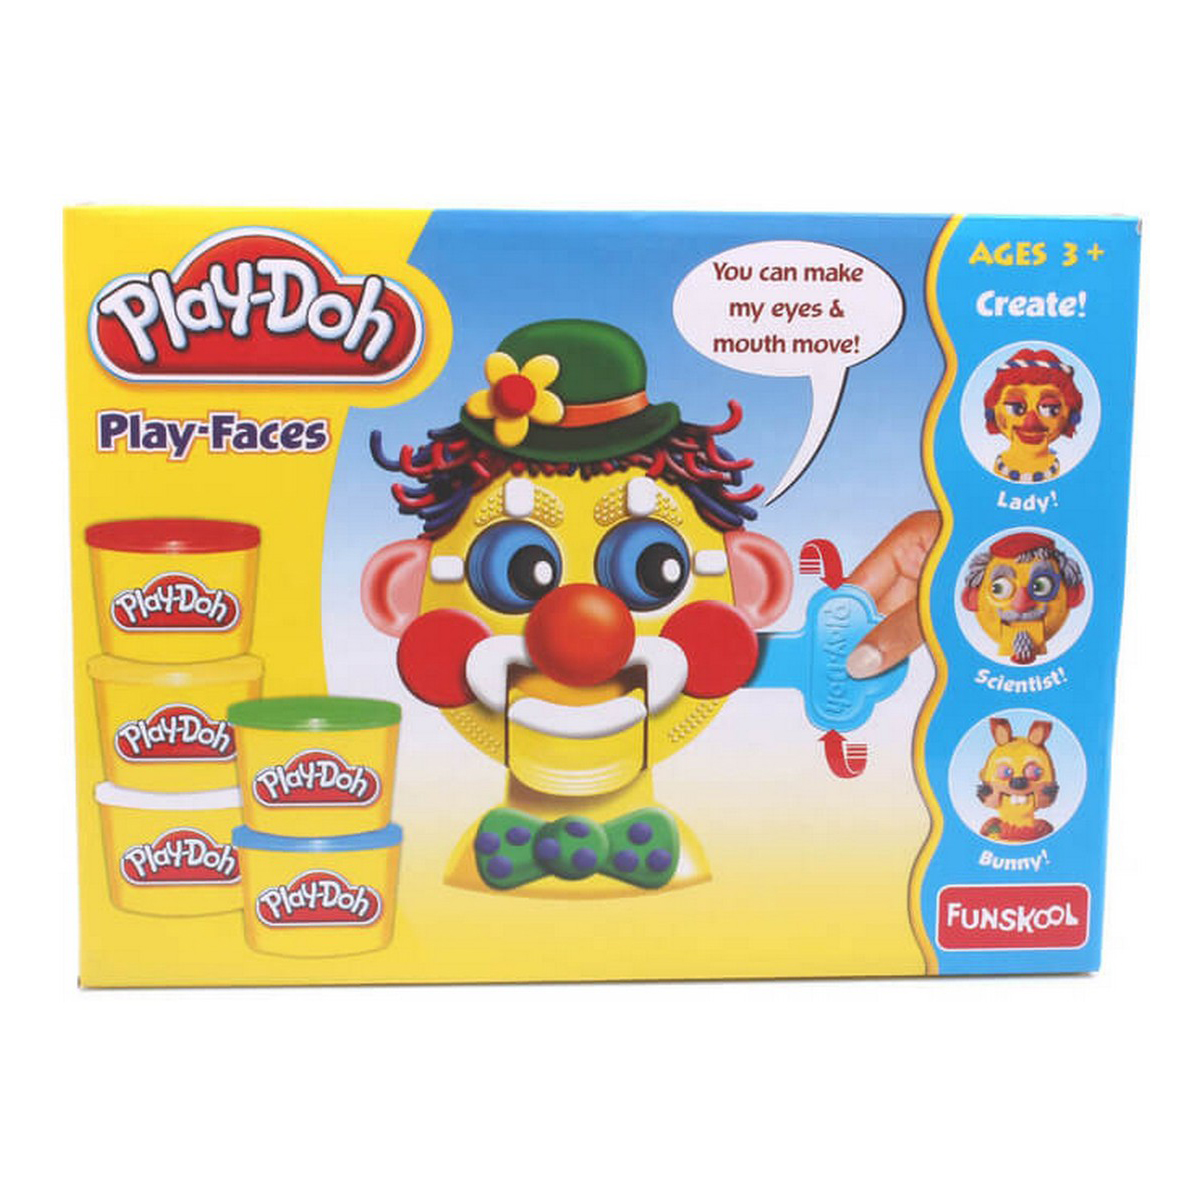 Funskool Playdoh Play Faces for Kids